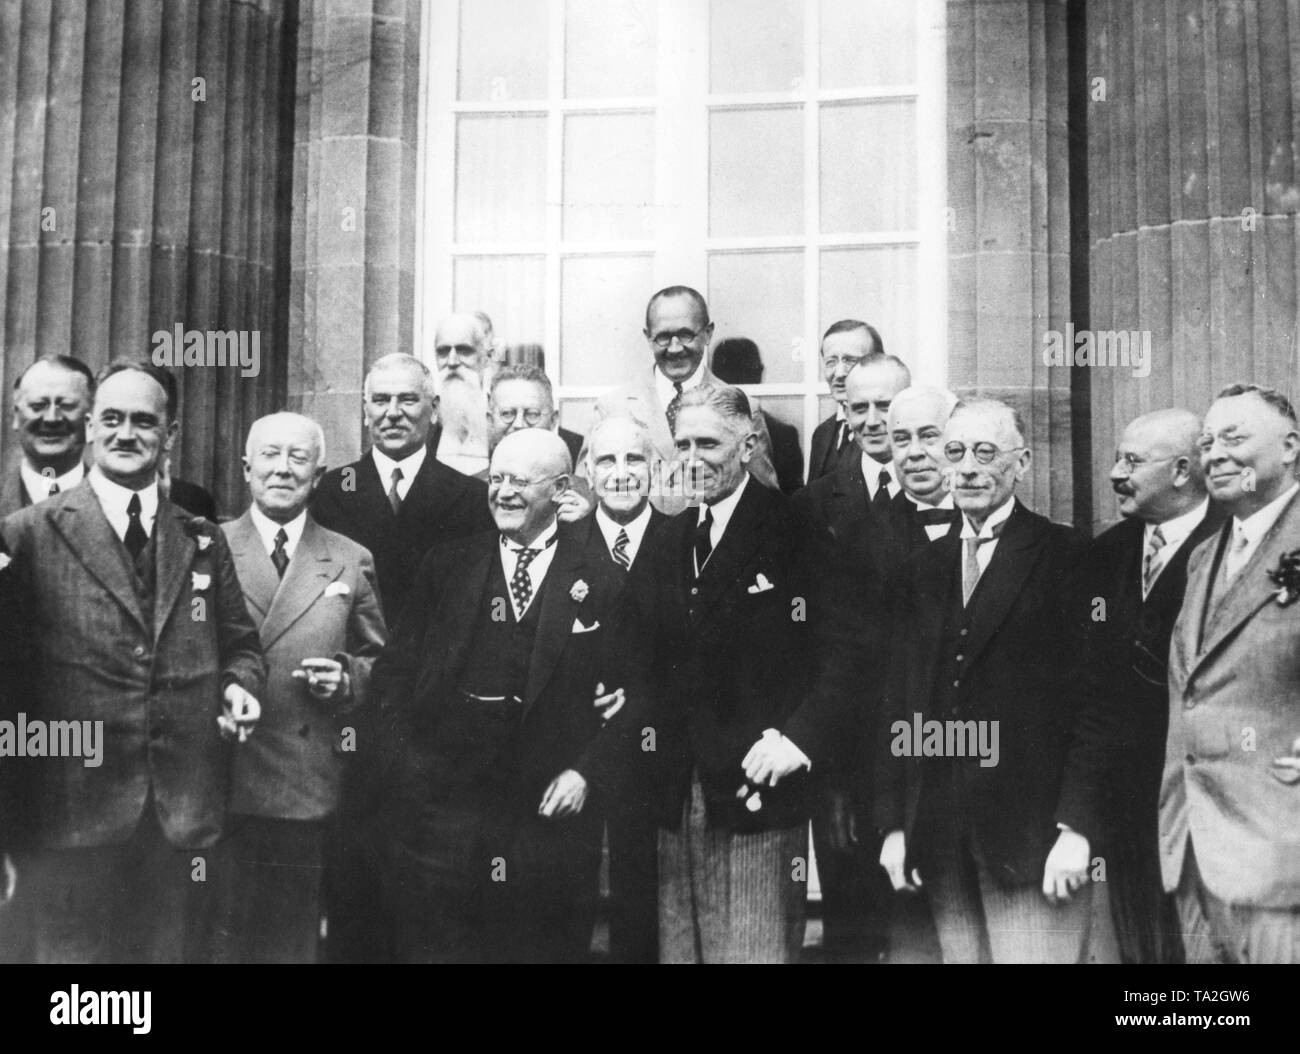 At a meeting with the prime ministers of all German states Chancellor Franz von Papen speaks about the so-called Prussian coup and the subsequent state of emergency. First row (from left to right): Werner Kuechenthal (Braunschweig, far left), Bernhard Adelung (Hessen), Walther Schieck (Saxony), Josef Schmitt (Baden), Mr. Rieper, Heinrich Held (Bavaria), Chancellor Franz von Papen, Wilhelm Bazille (Wuerttemberg Minister of Culture), Minister of the Interior Wilhelm Freiherr von Gayl, Gustav Adolf Dehlinger, and Fritz Schaeffer (Minister of State in the Bavarian Ministry of Finance). Stock Photo